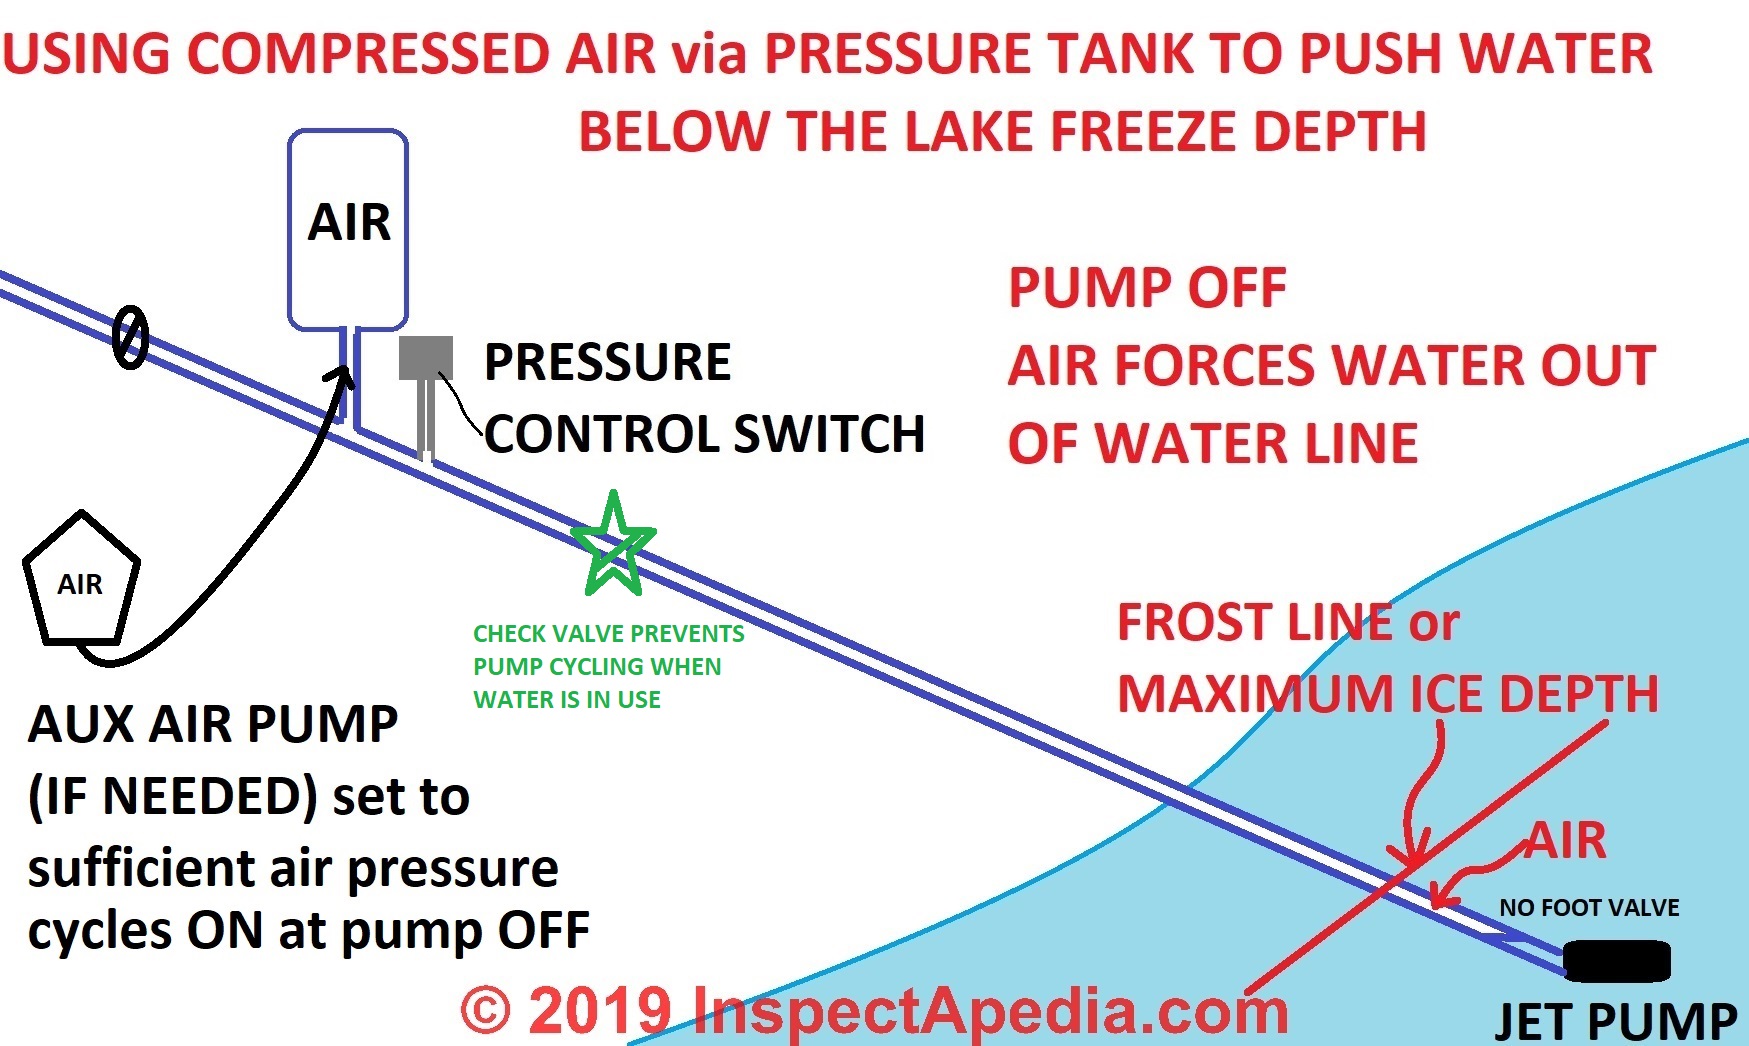 Pipe Freeze Protection How To Freezeproof Winterize A House How To Freeze Protect Water Supply Piping Drain Piping Water Pumps Water Tanks Heaters